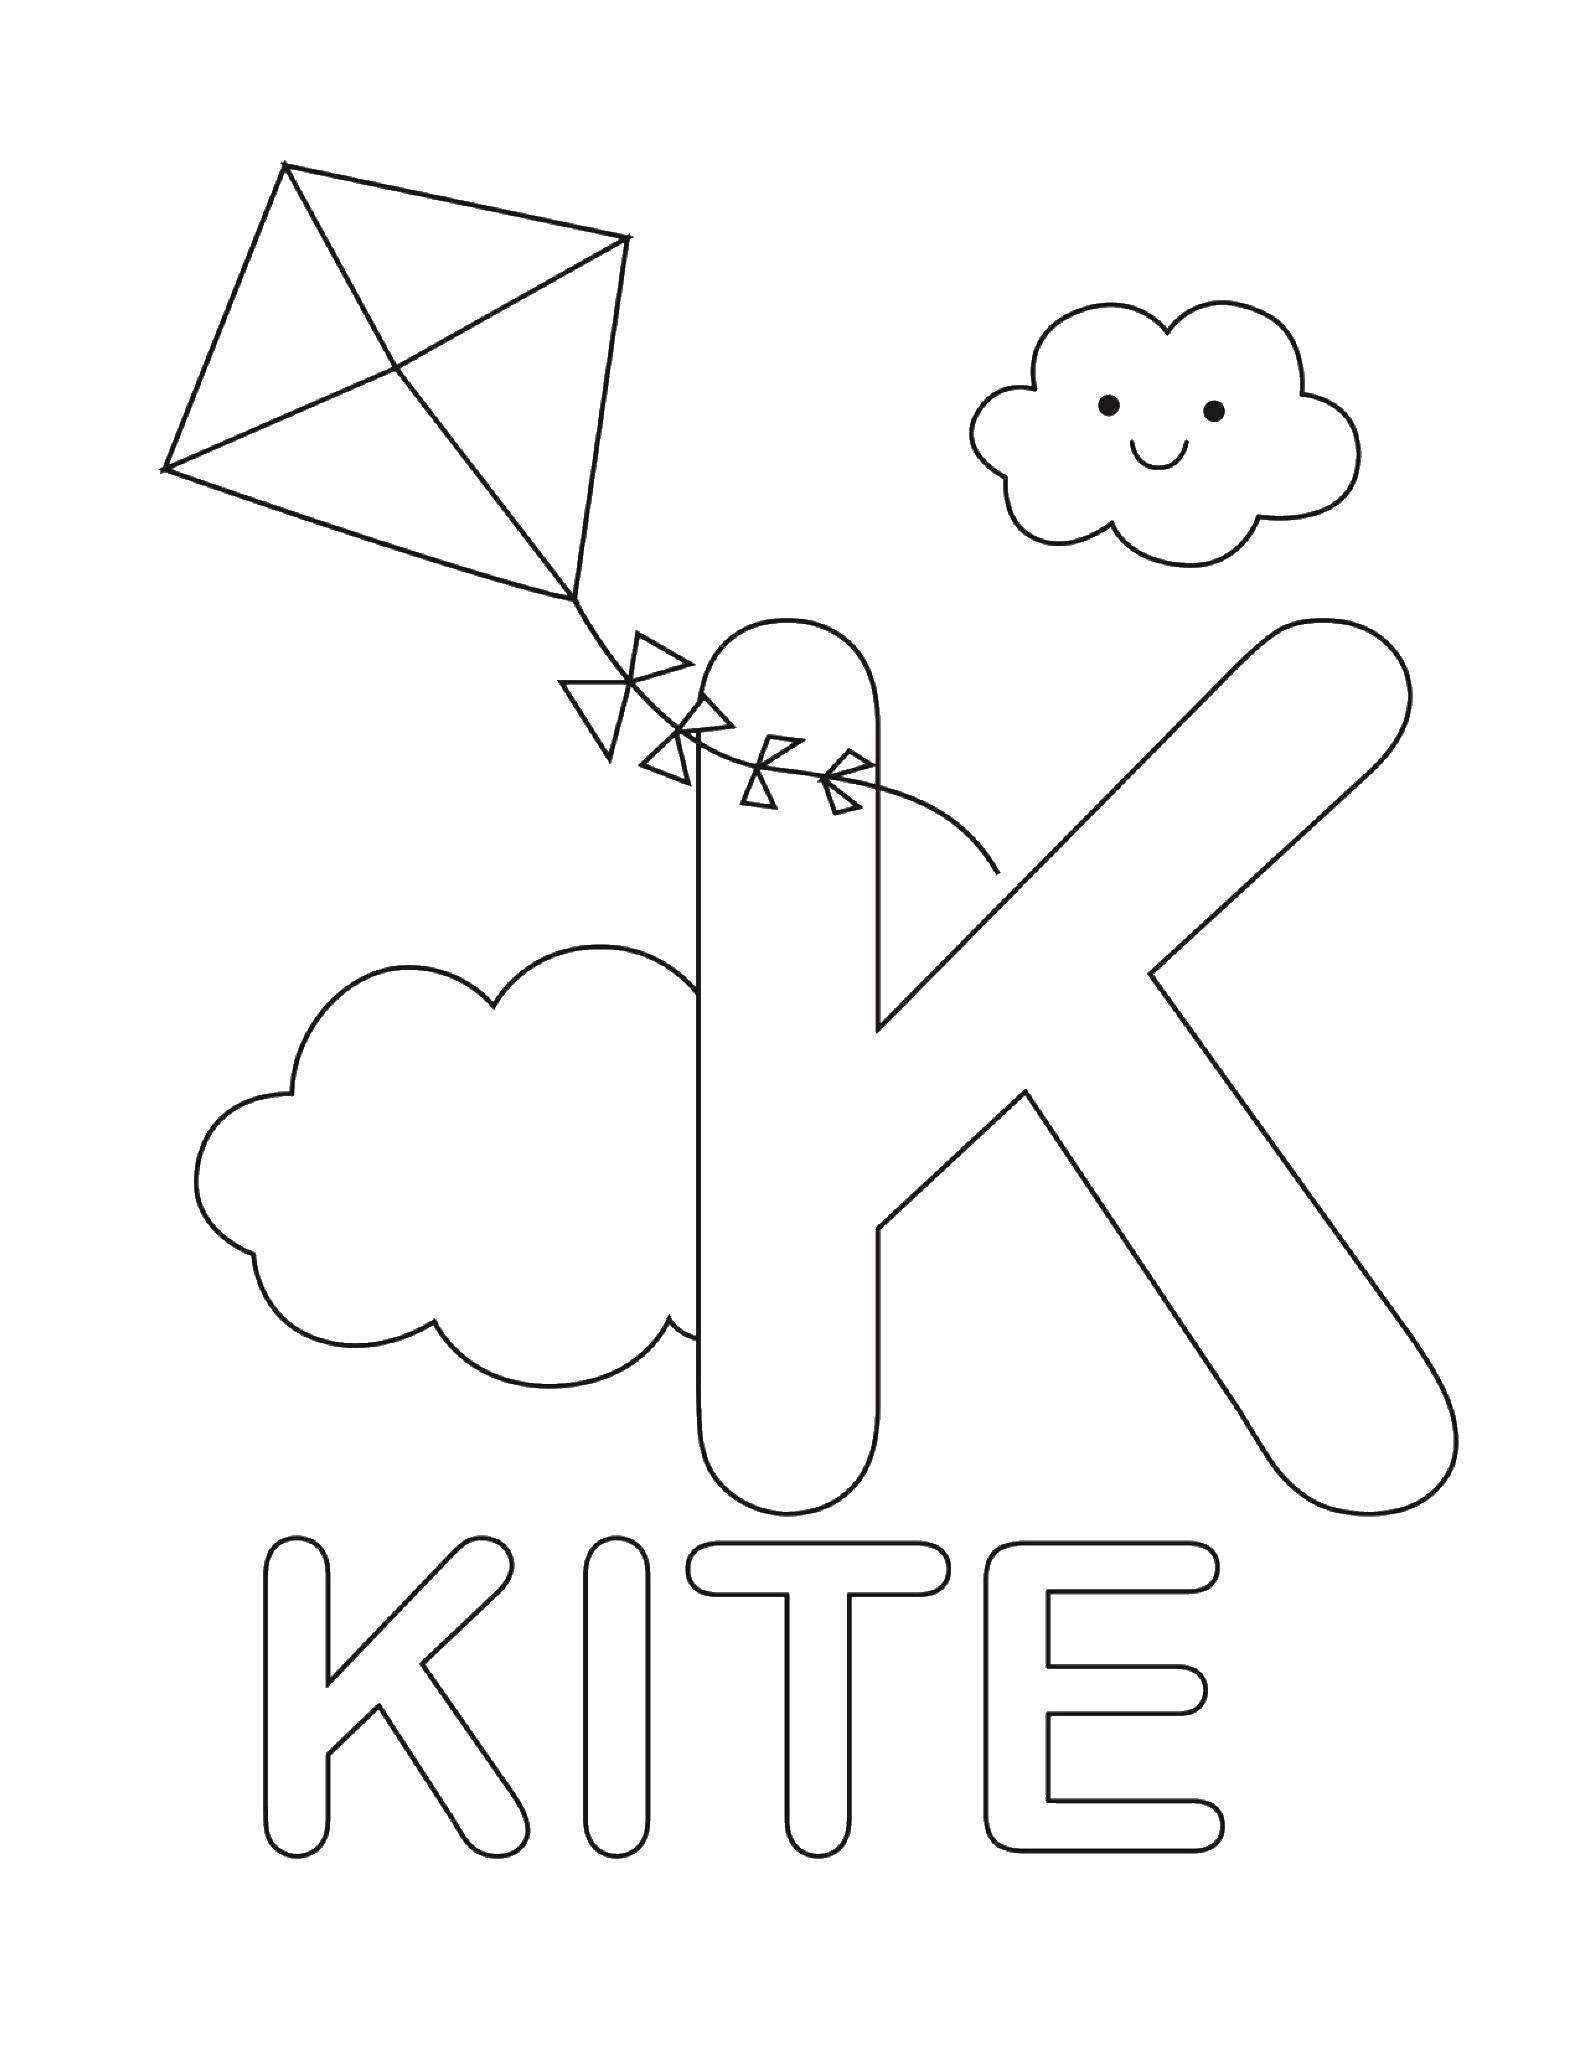 Coloring In kite. Category English words. Tags:  English.